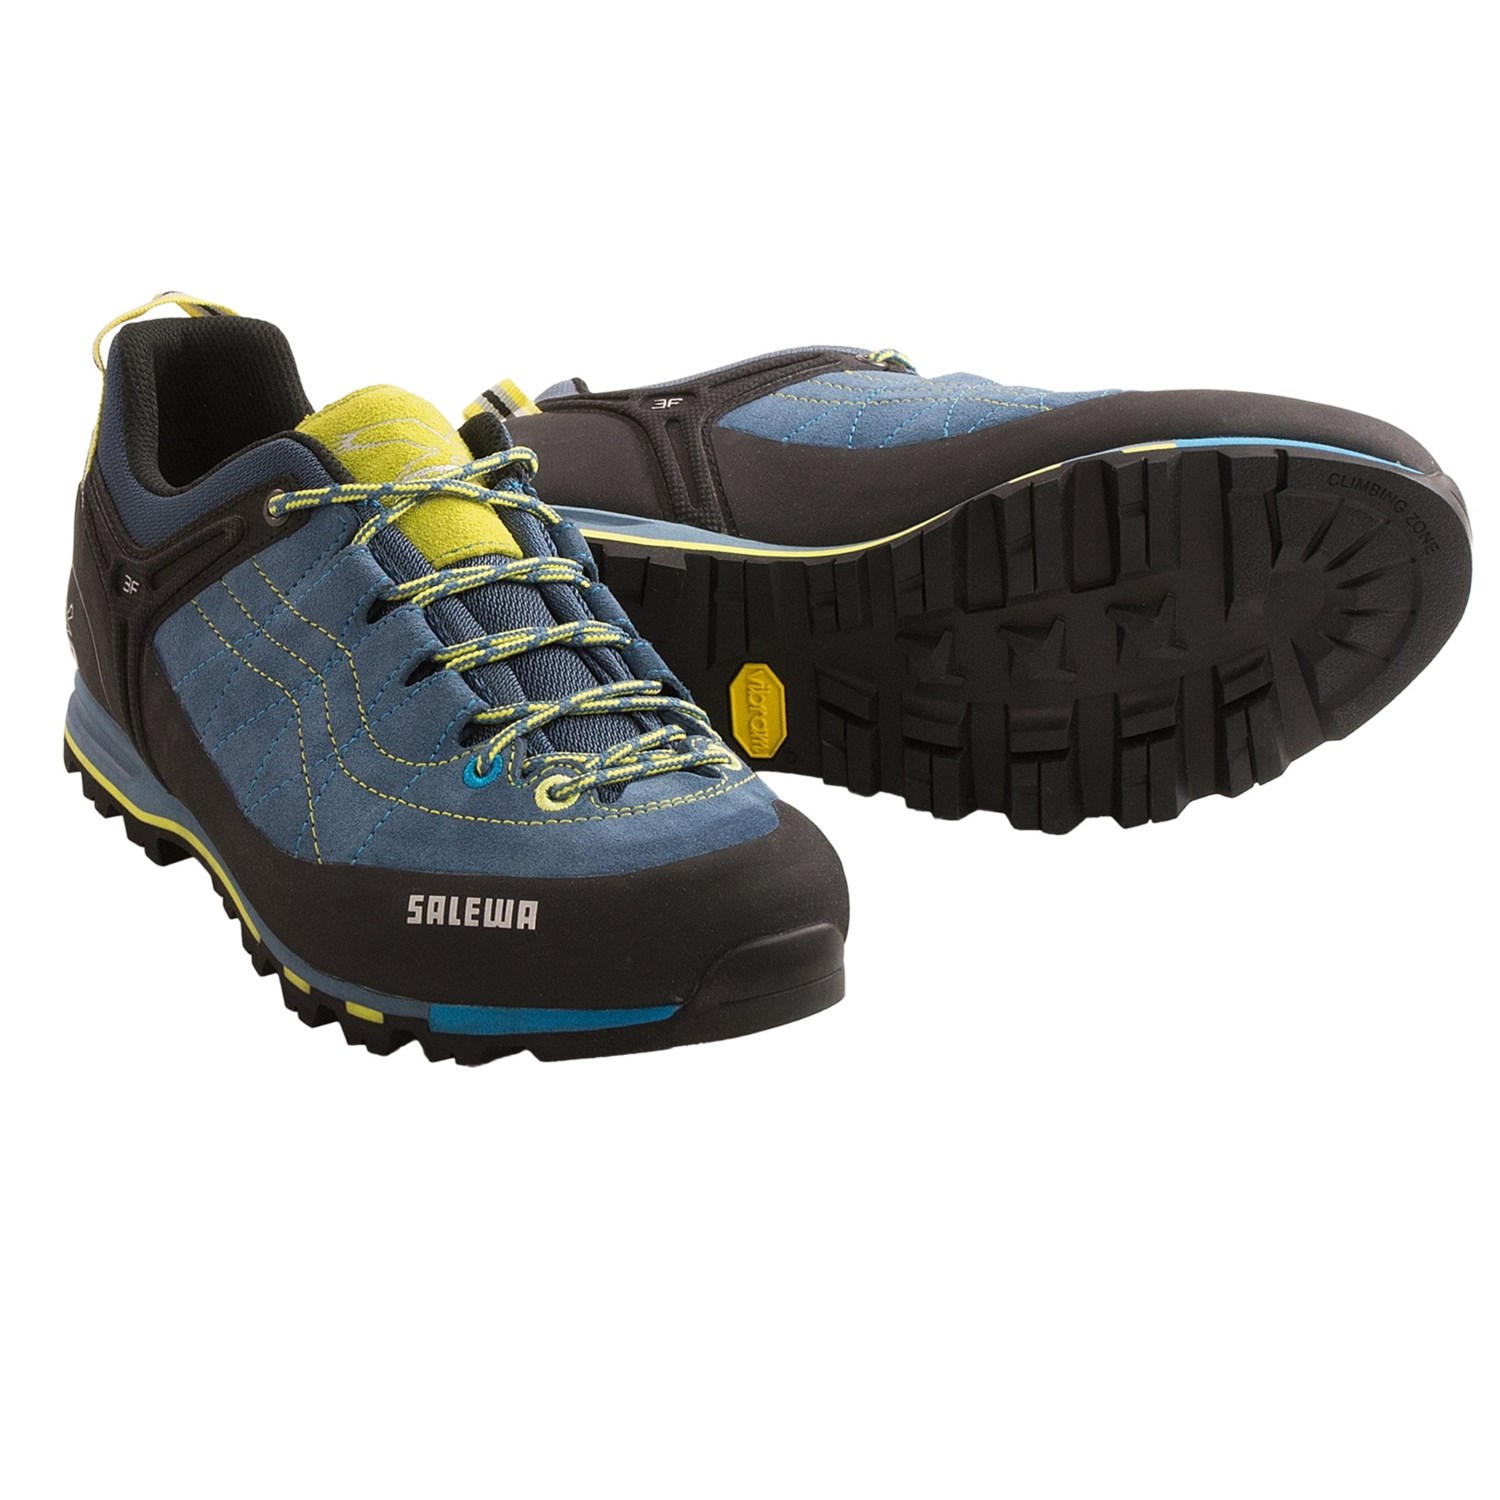 outdoor gear lab women's hiking boots